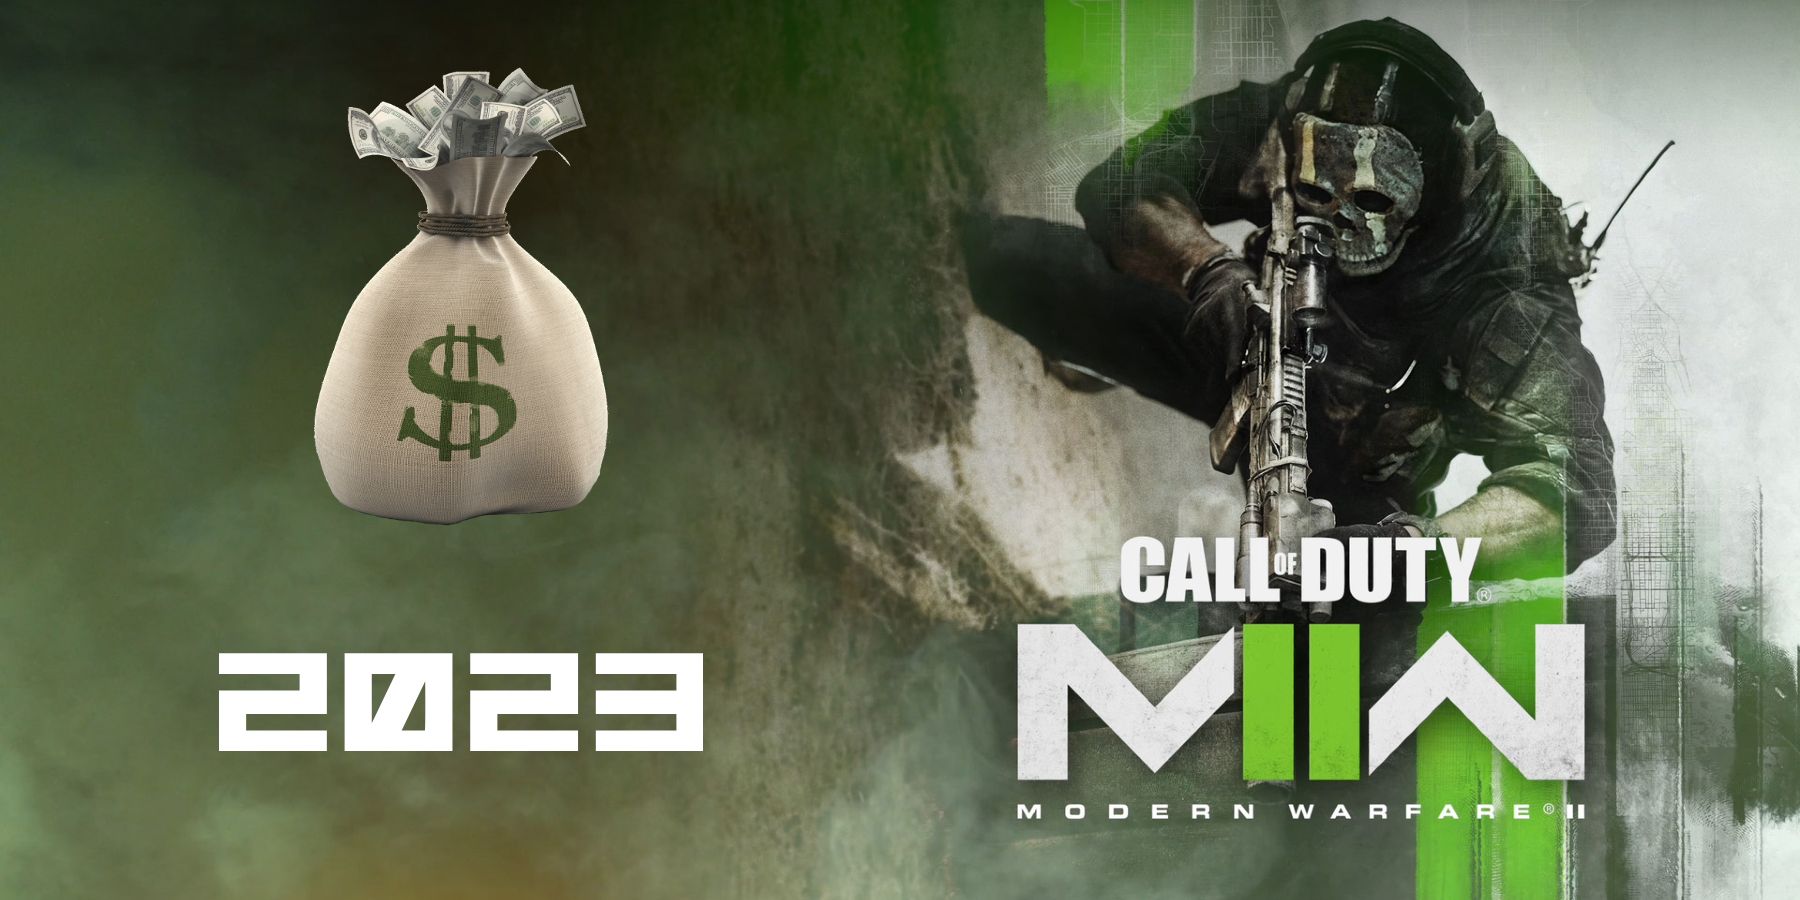 Call of Duty Modern Warfare 2 DLC likely to release in 2023, as Activision  confirms 'next full premium release